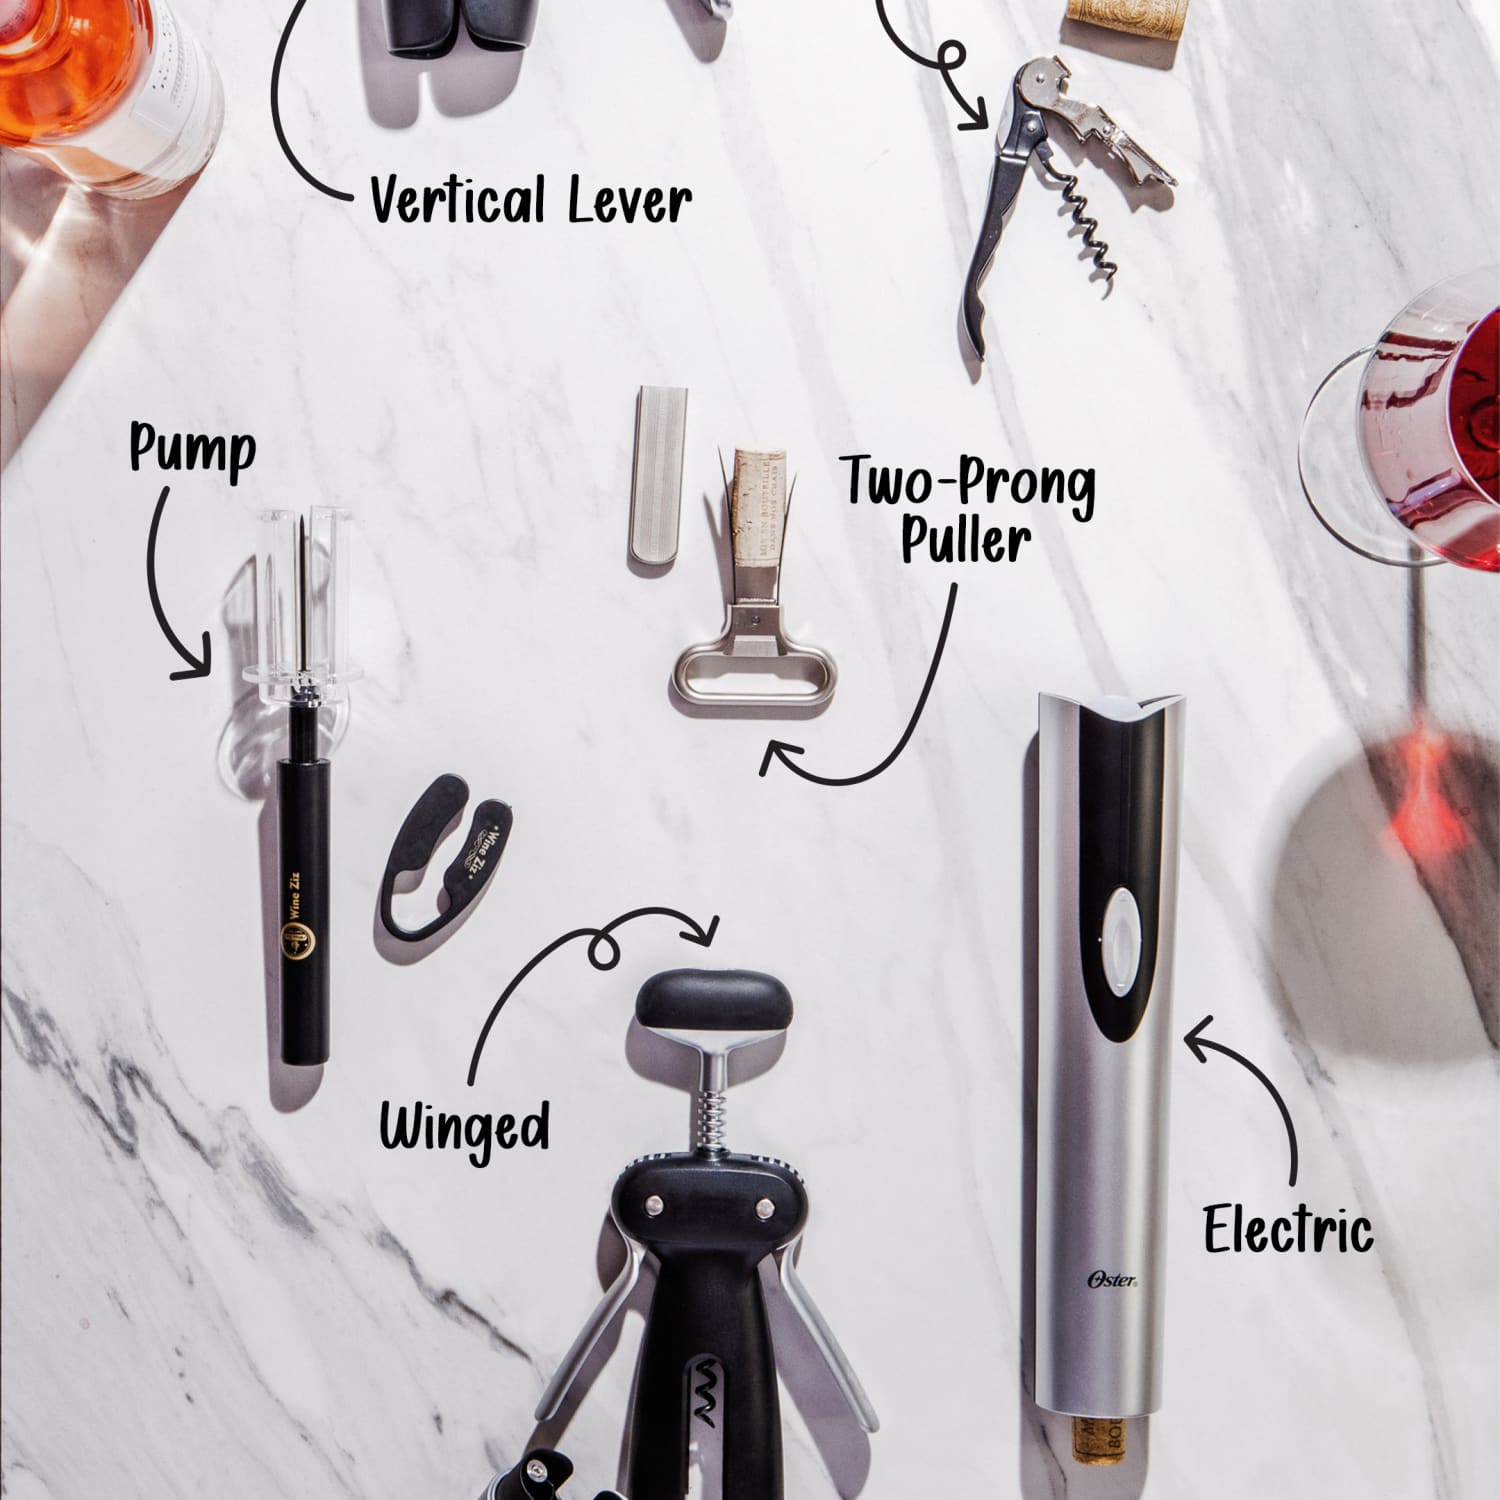 Wine Bottle Opener Types: Which Kind Is Right For You? %%sep%% %%sitename%%